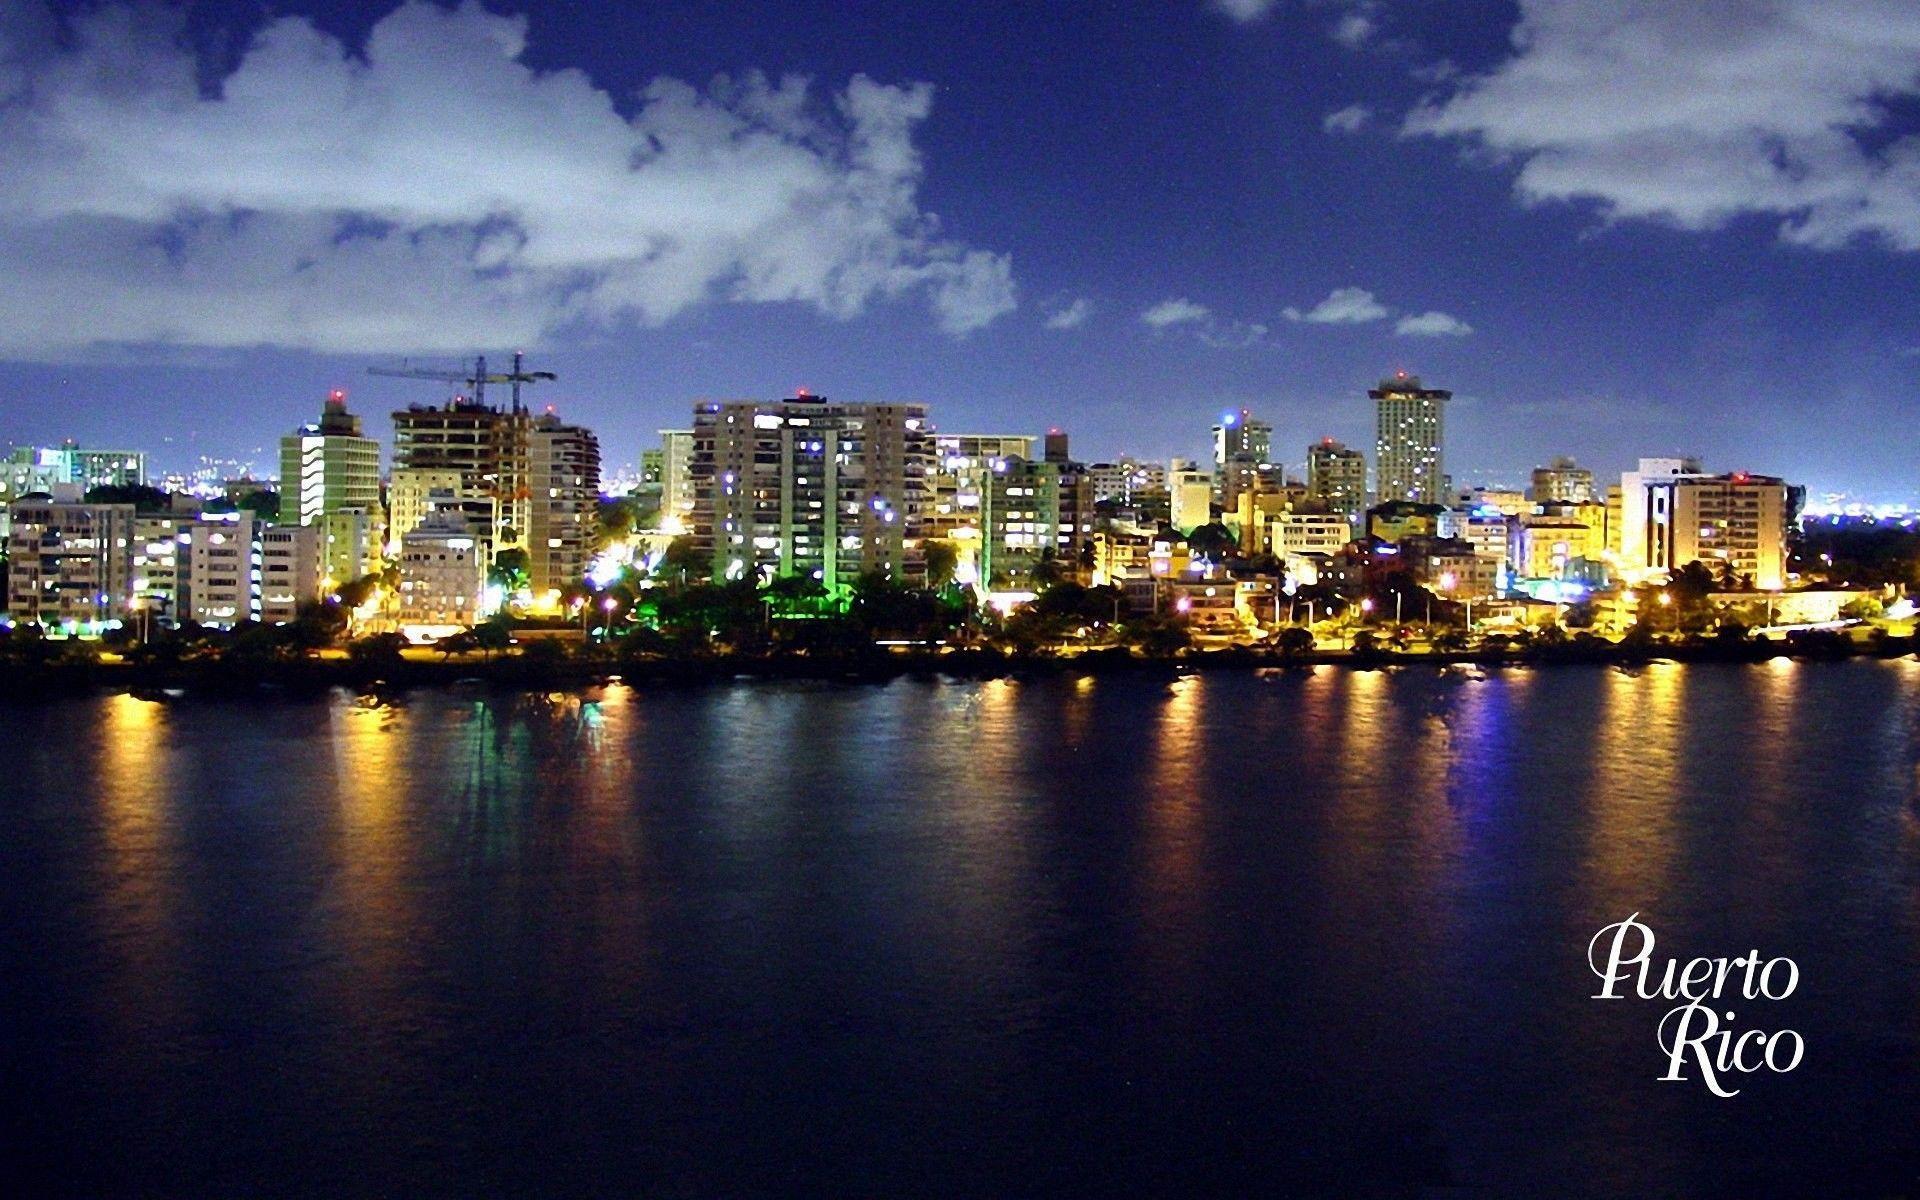 Puerto Rico Wallpapers - Full HD wallpaper search